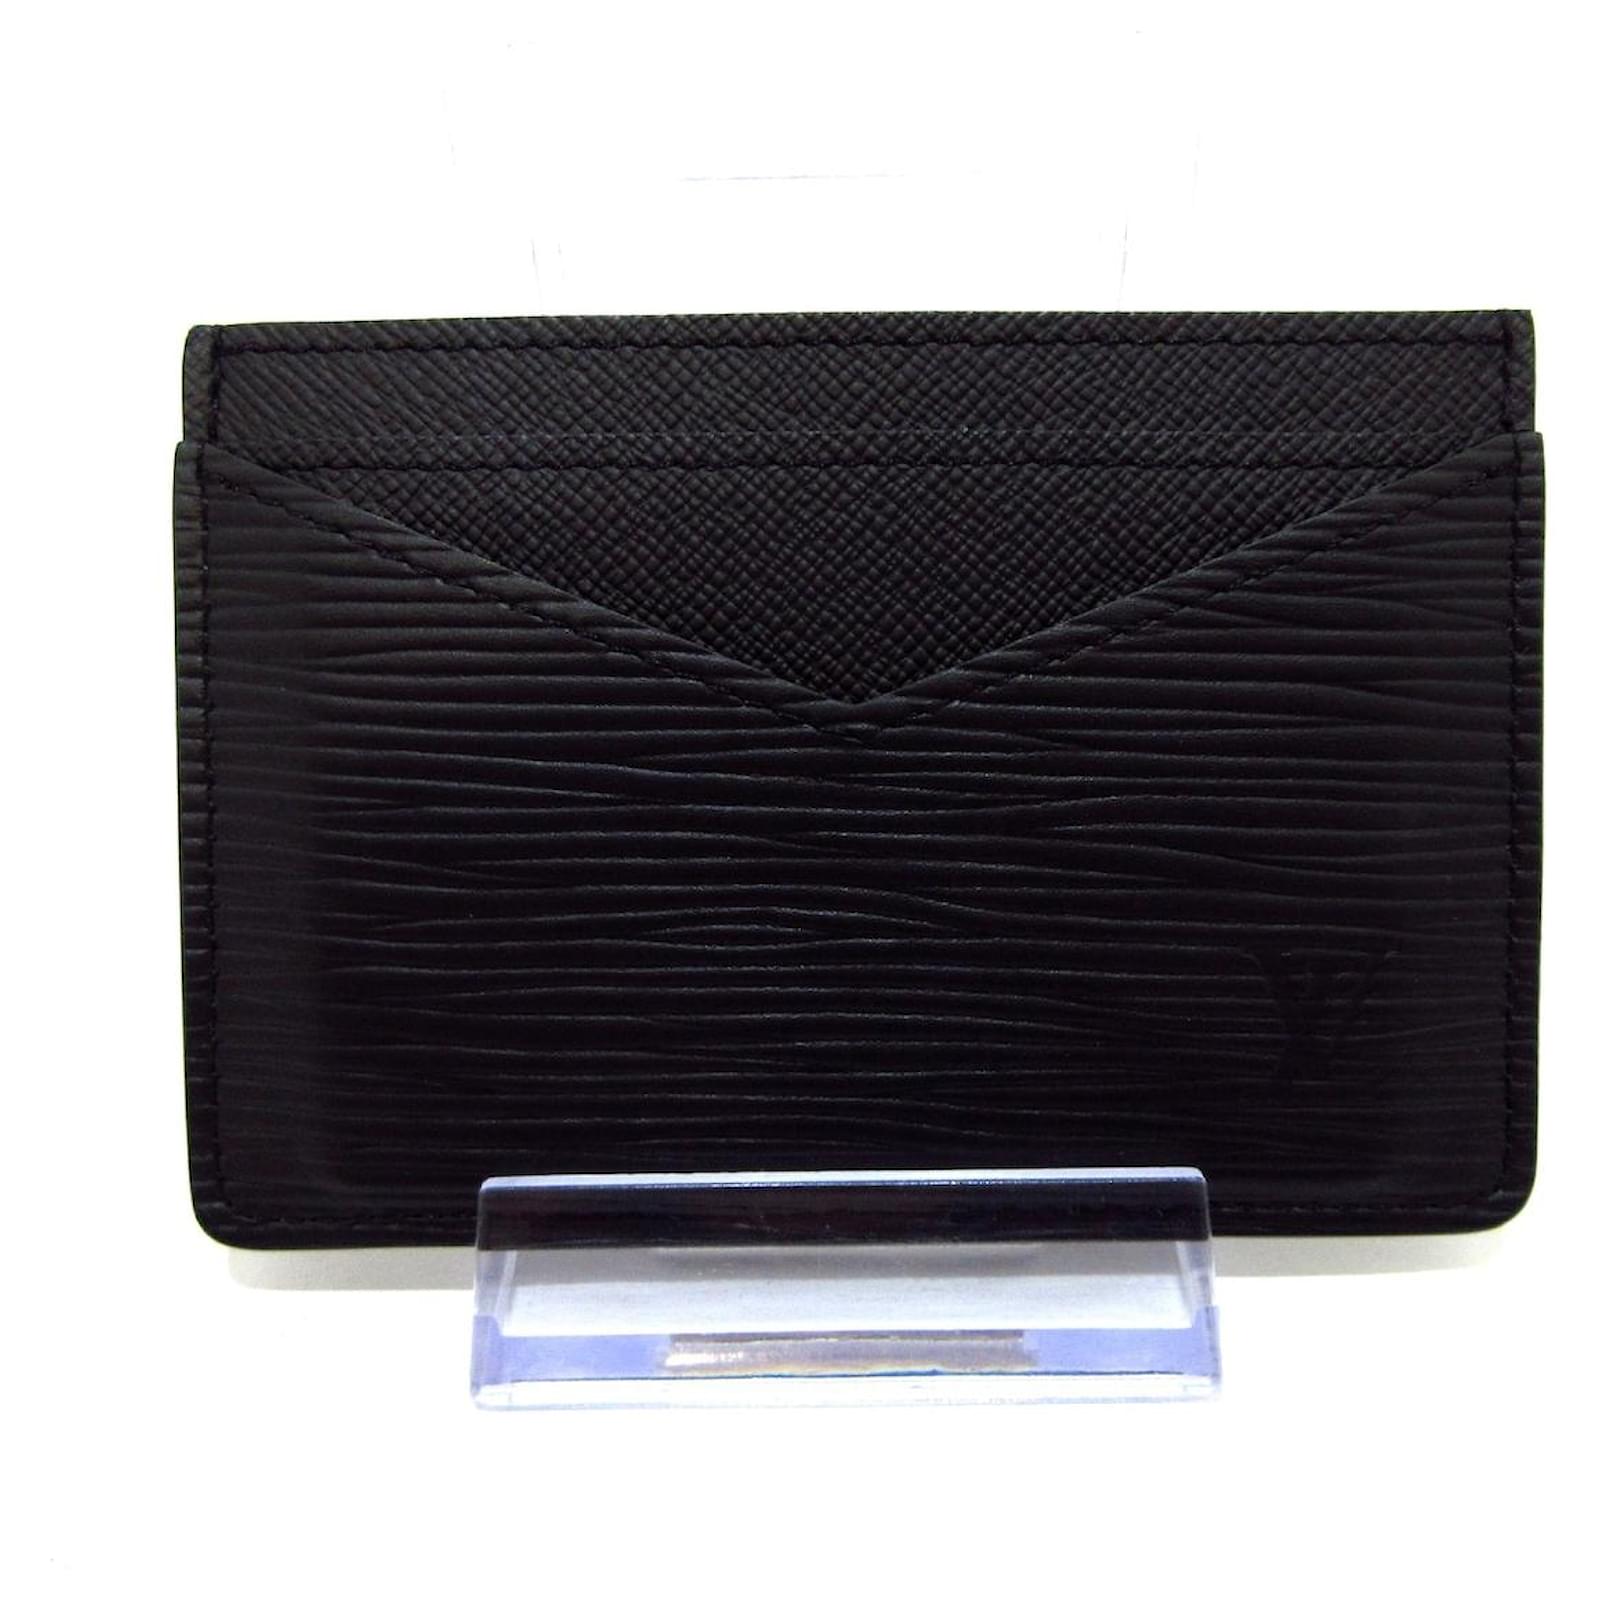 Neo Porte Cartes - SMALL LEATHER GOODS